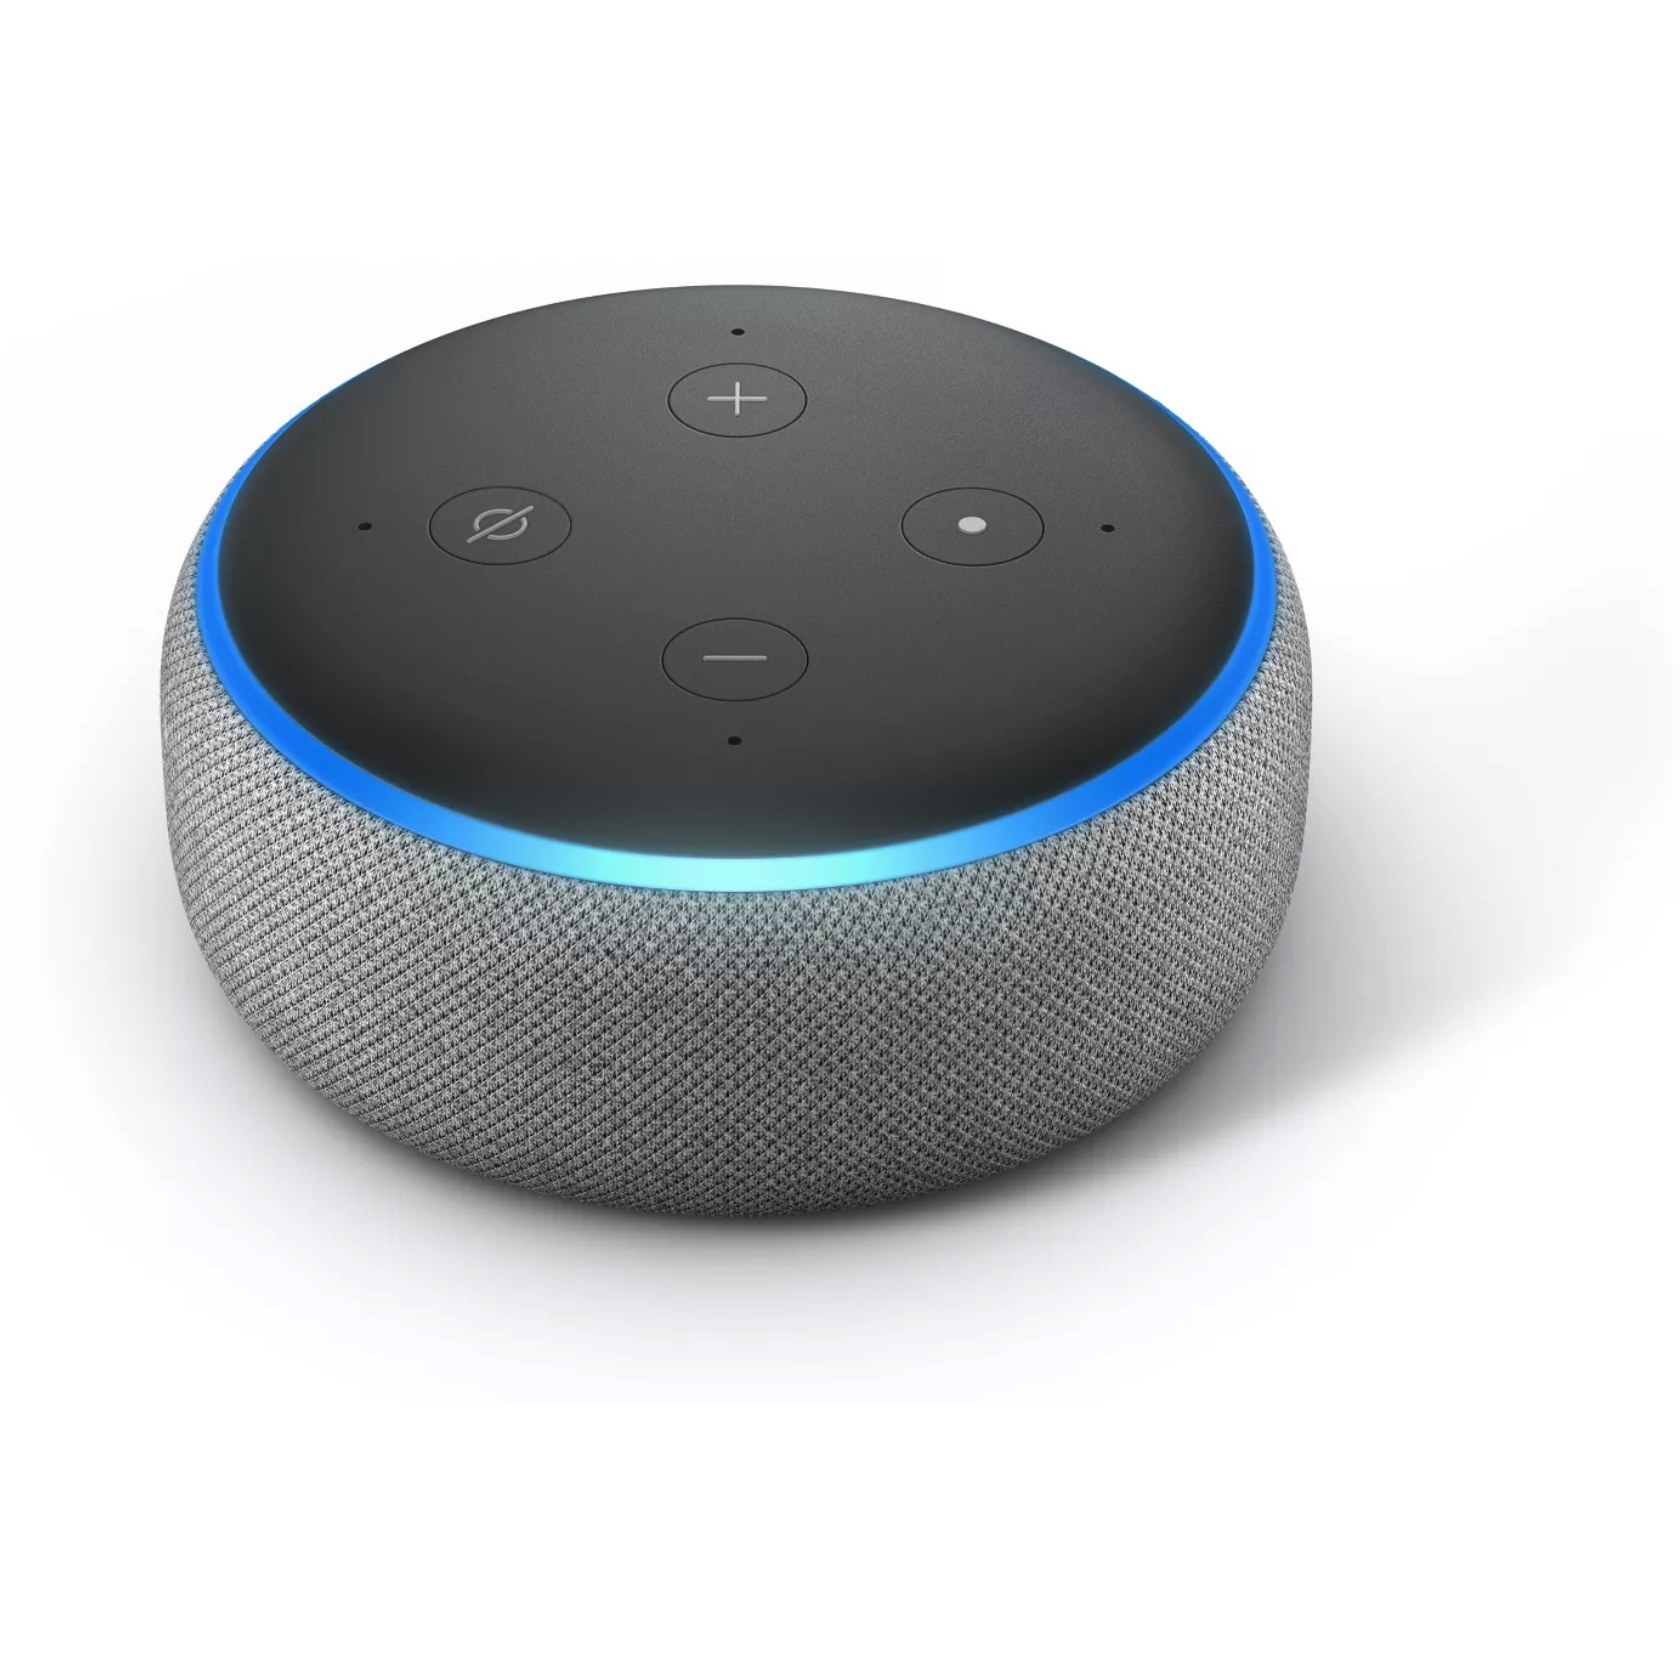 A short smart speaker with volume buttons, an action button, and a blue light ring.